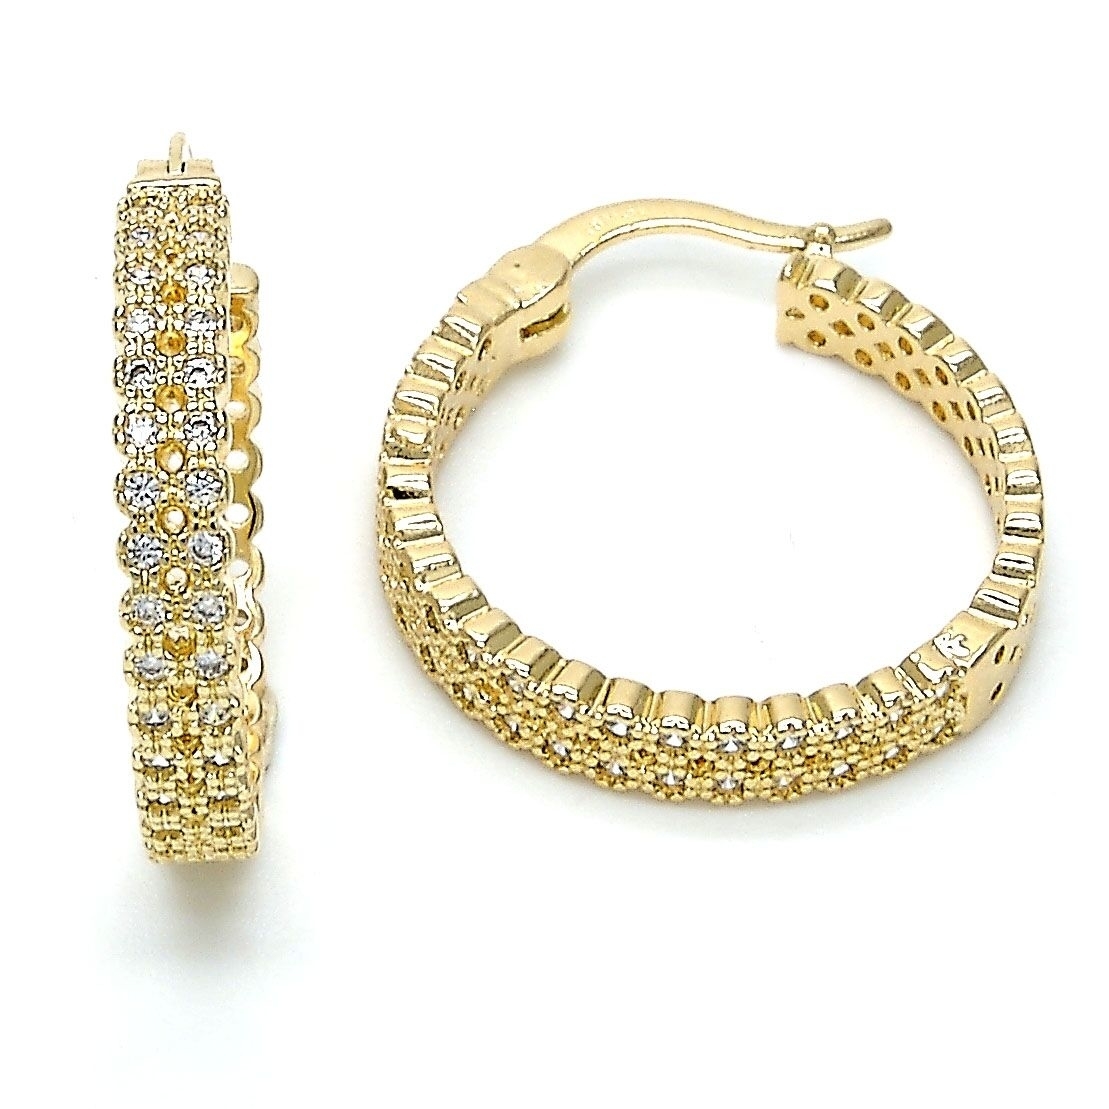 Gold Filled High Polish Finsh Nugget Hoop Earrings With Micro Pava Setting